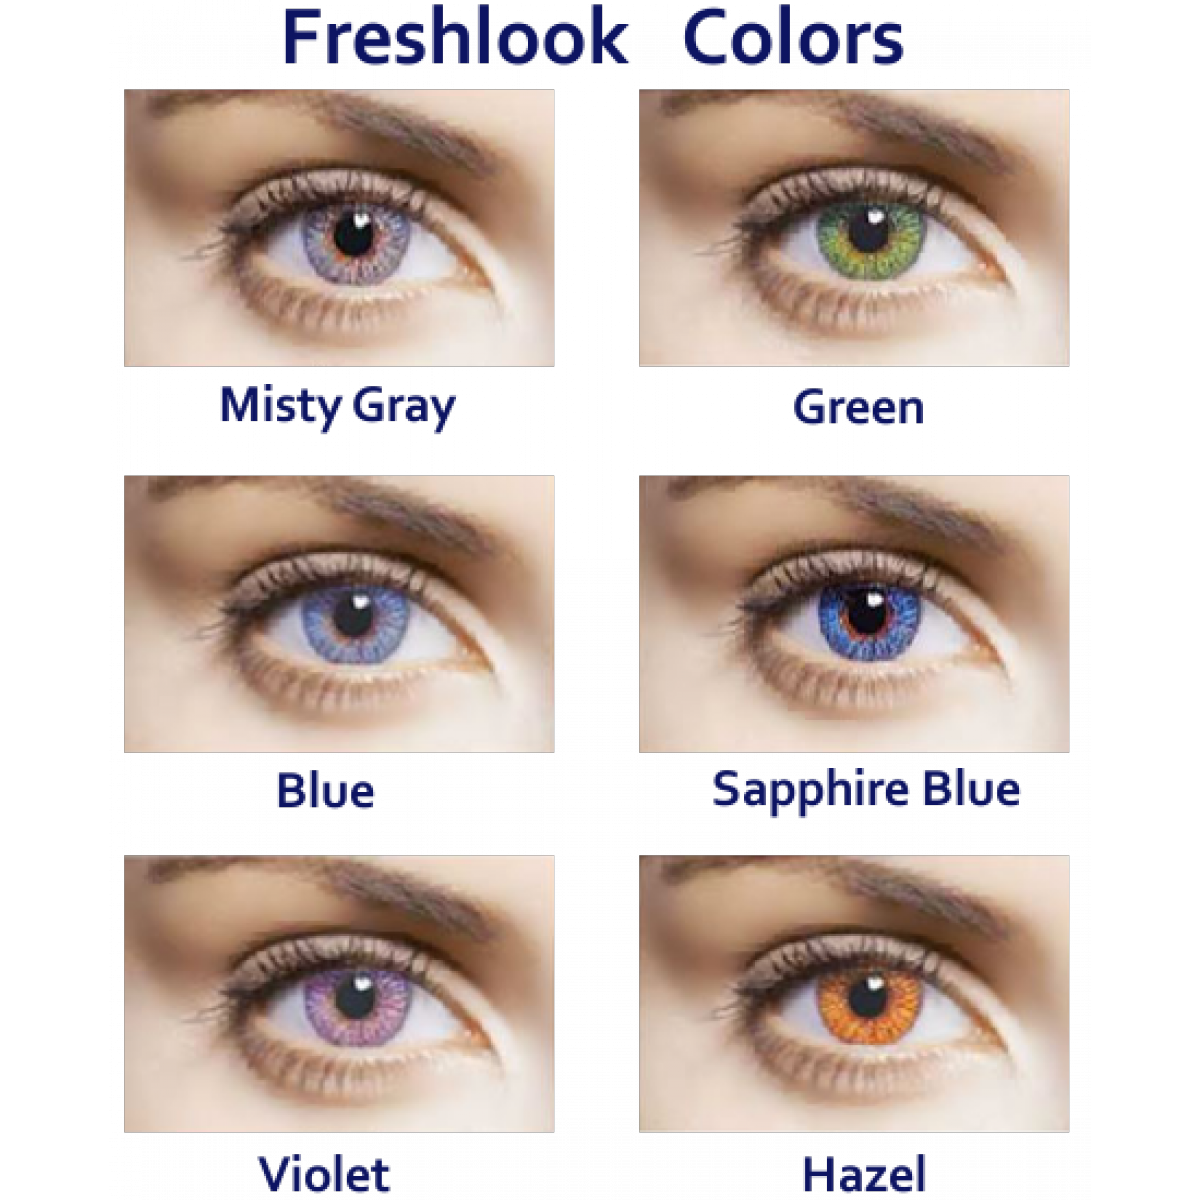 Freshlook Colorblends Optica Mastervision